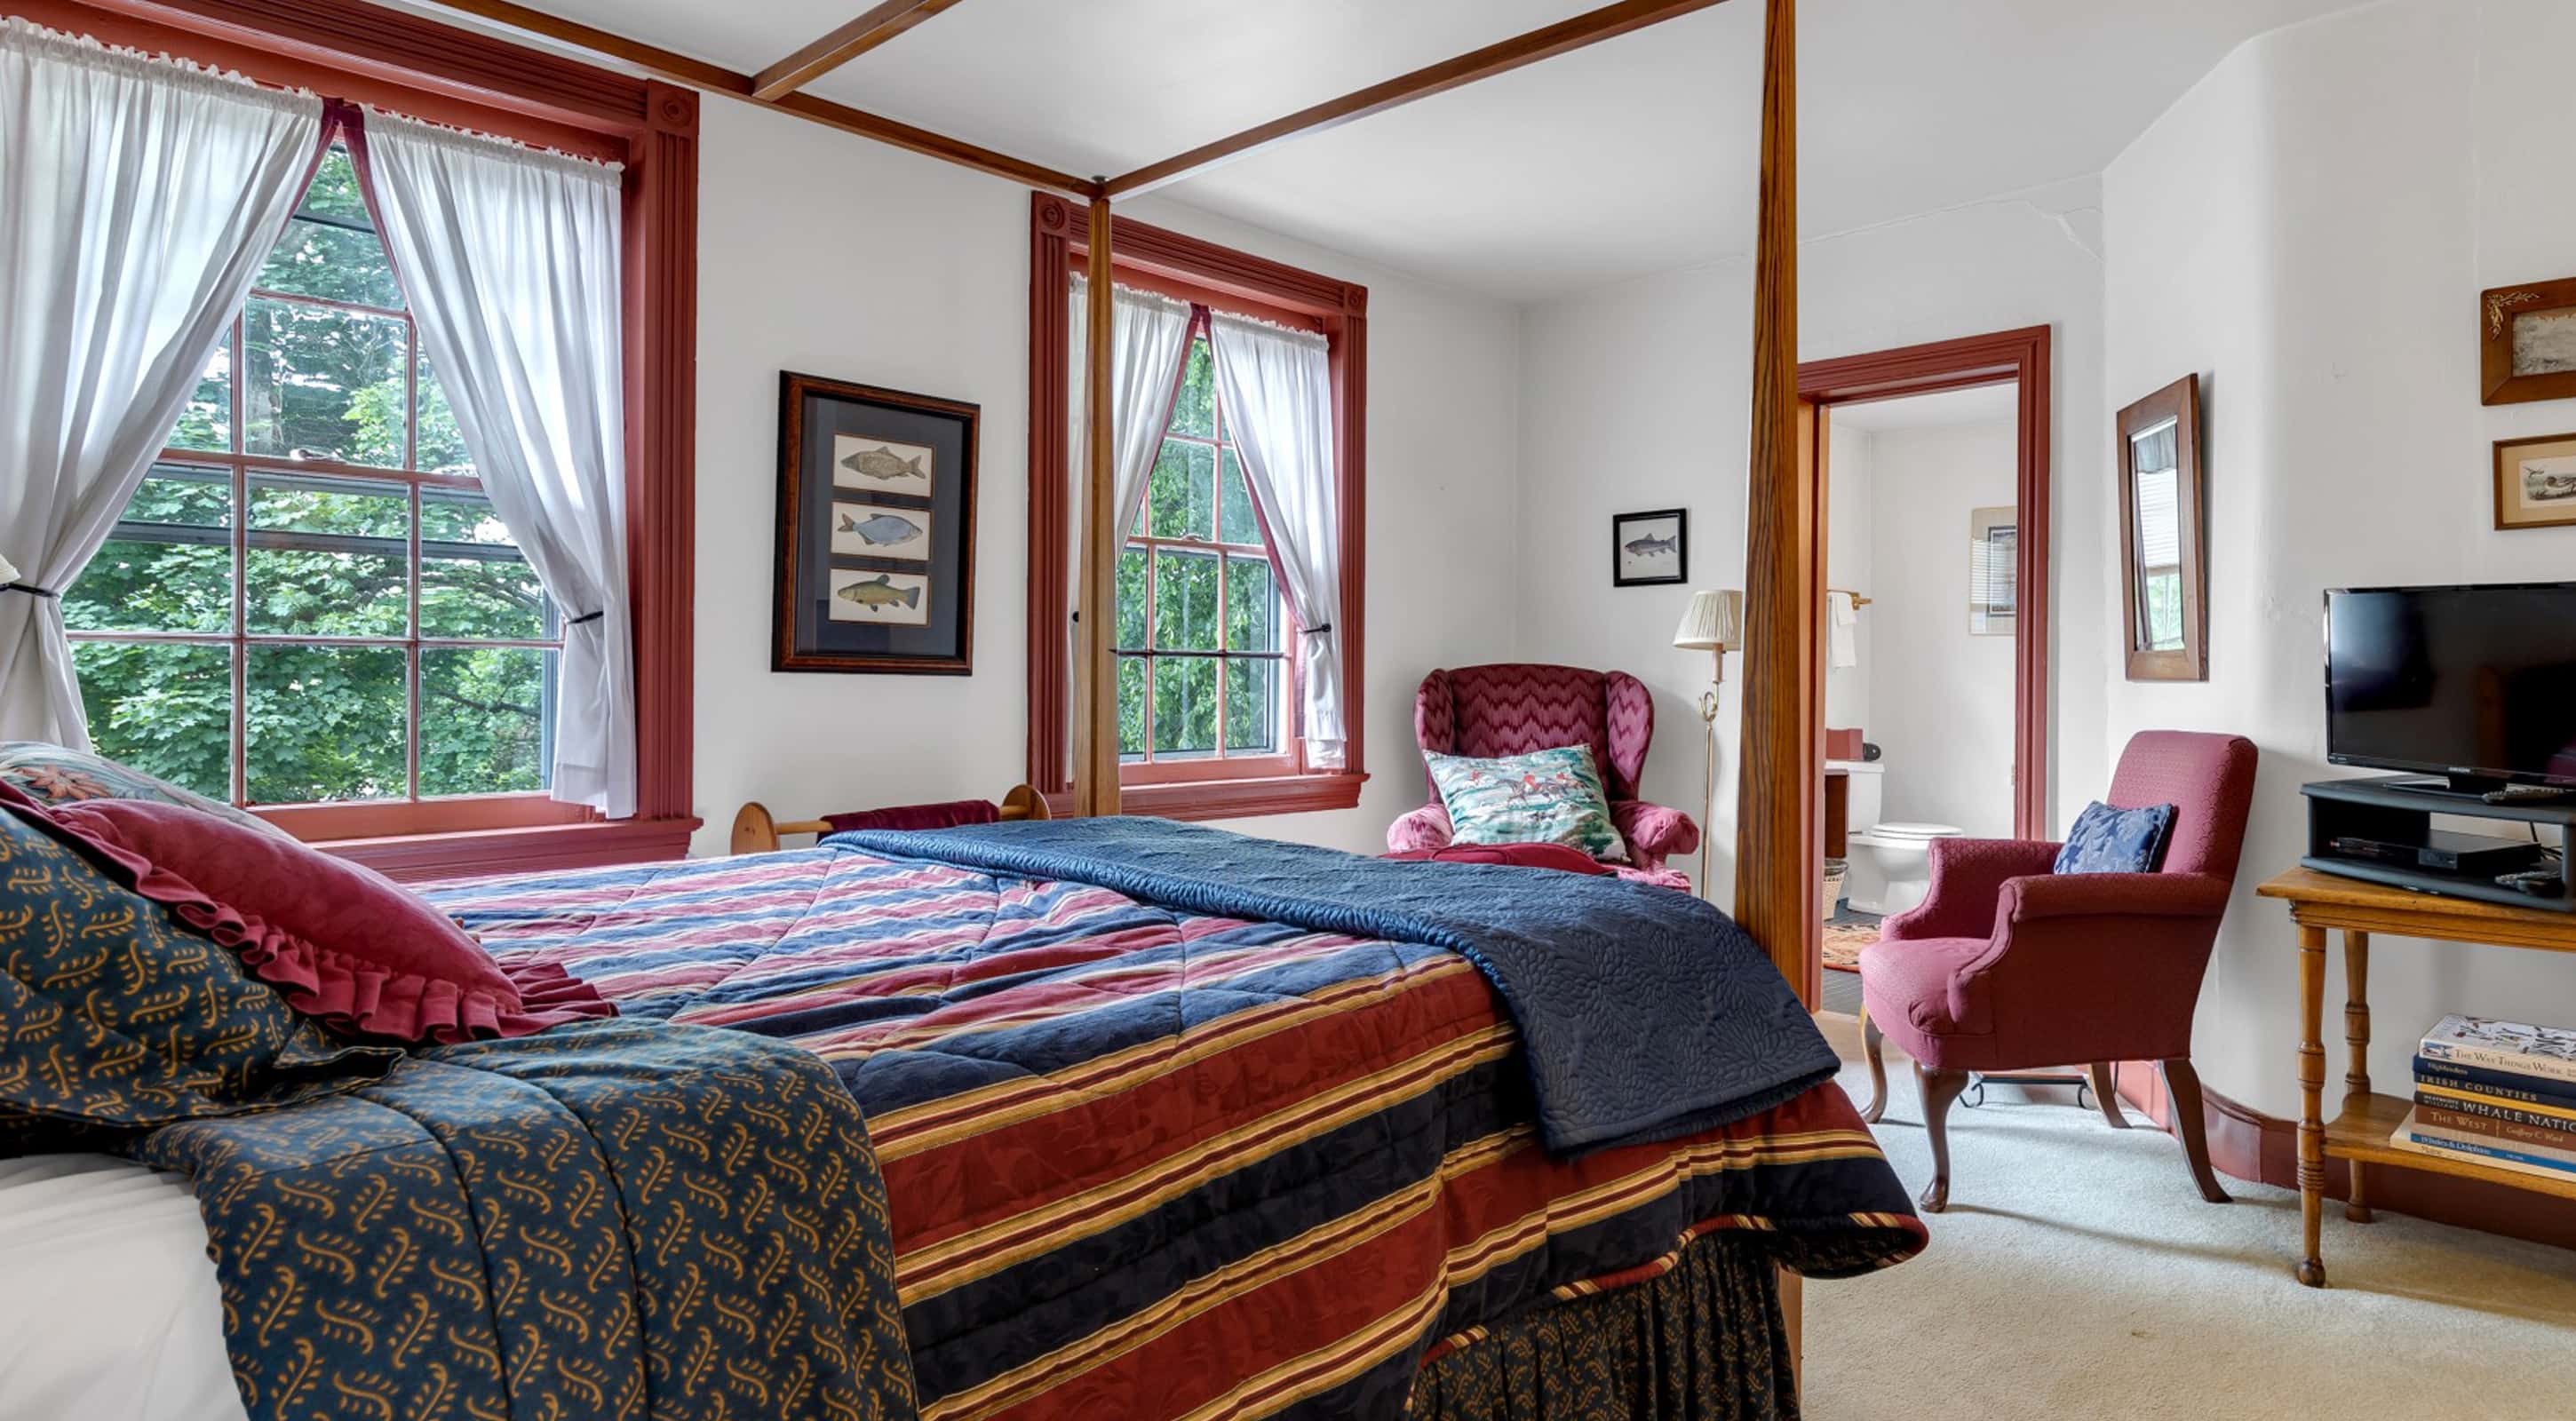 The Polo Room is one of the best places to stay in Lancaster County, Pa